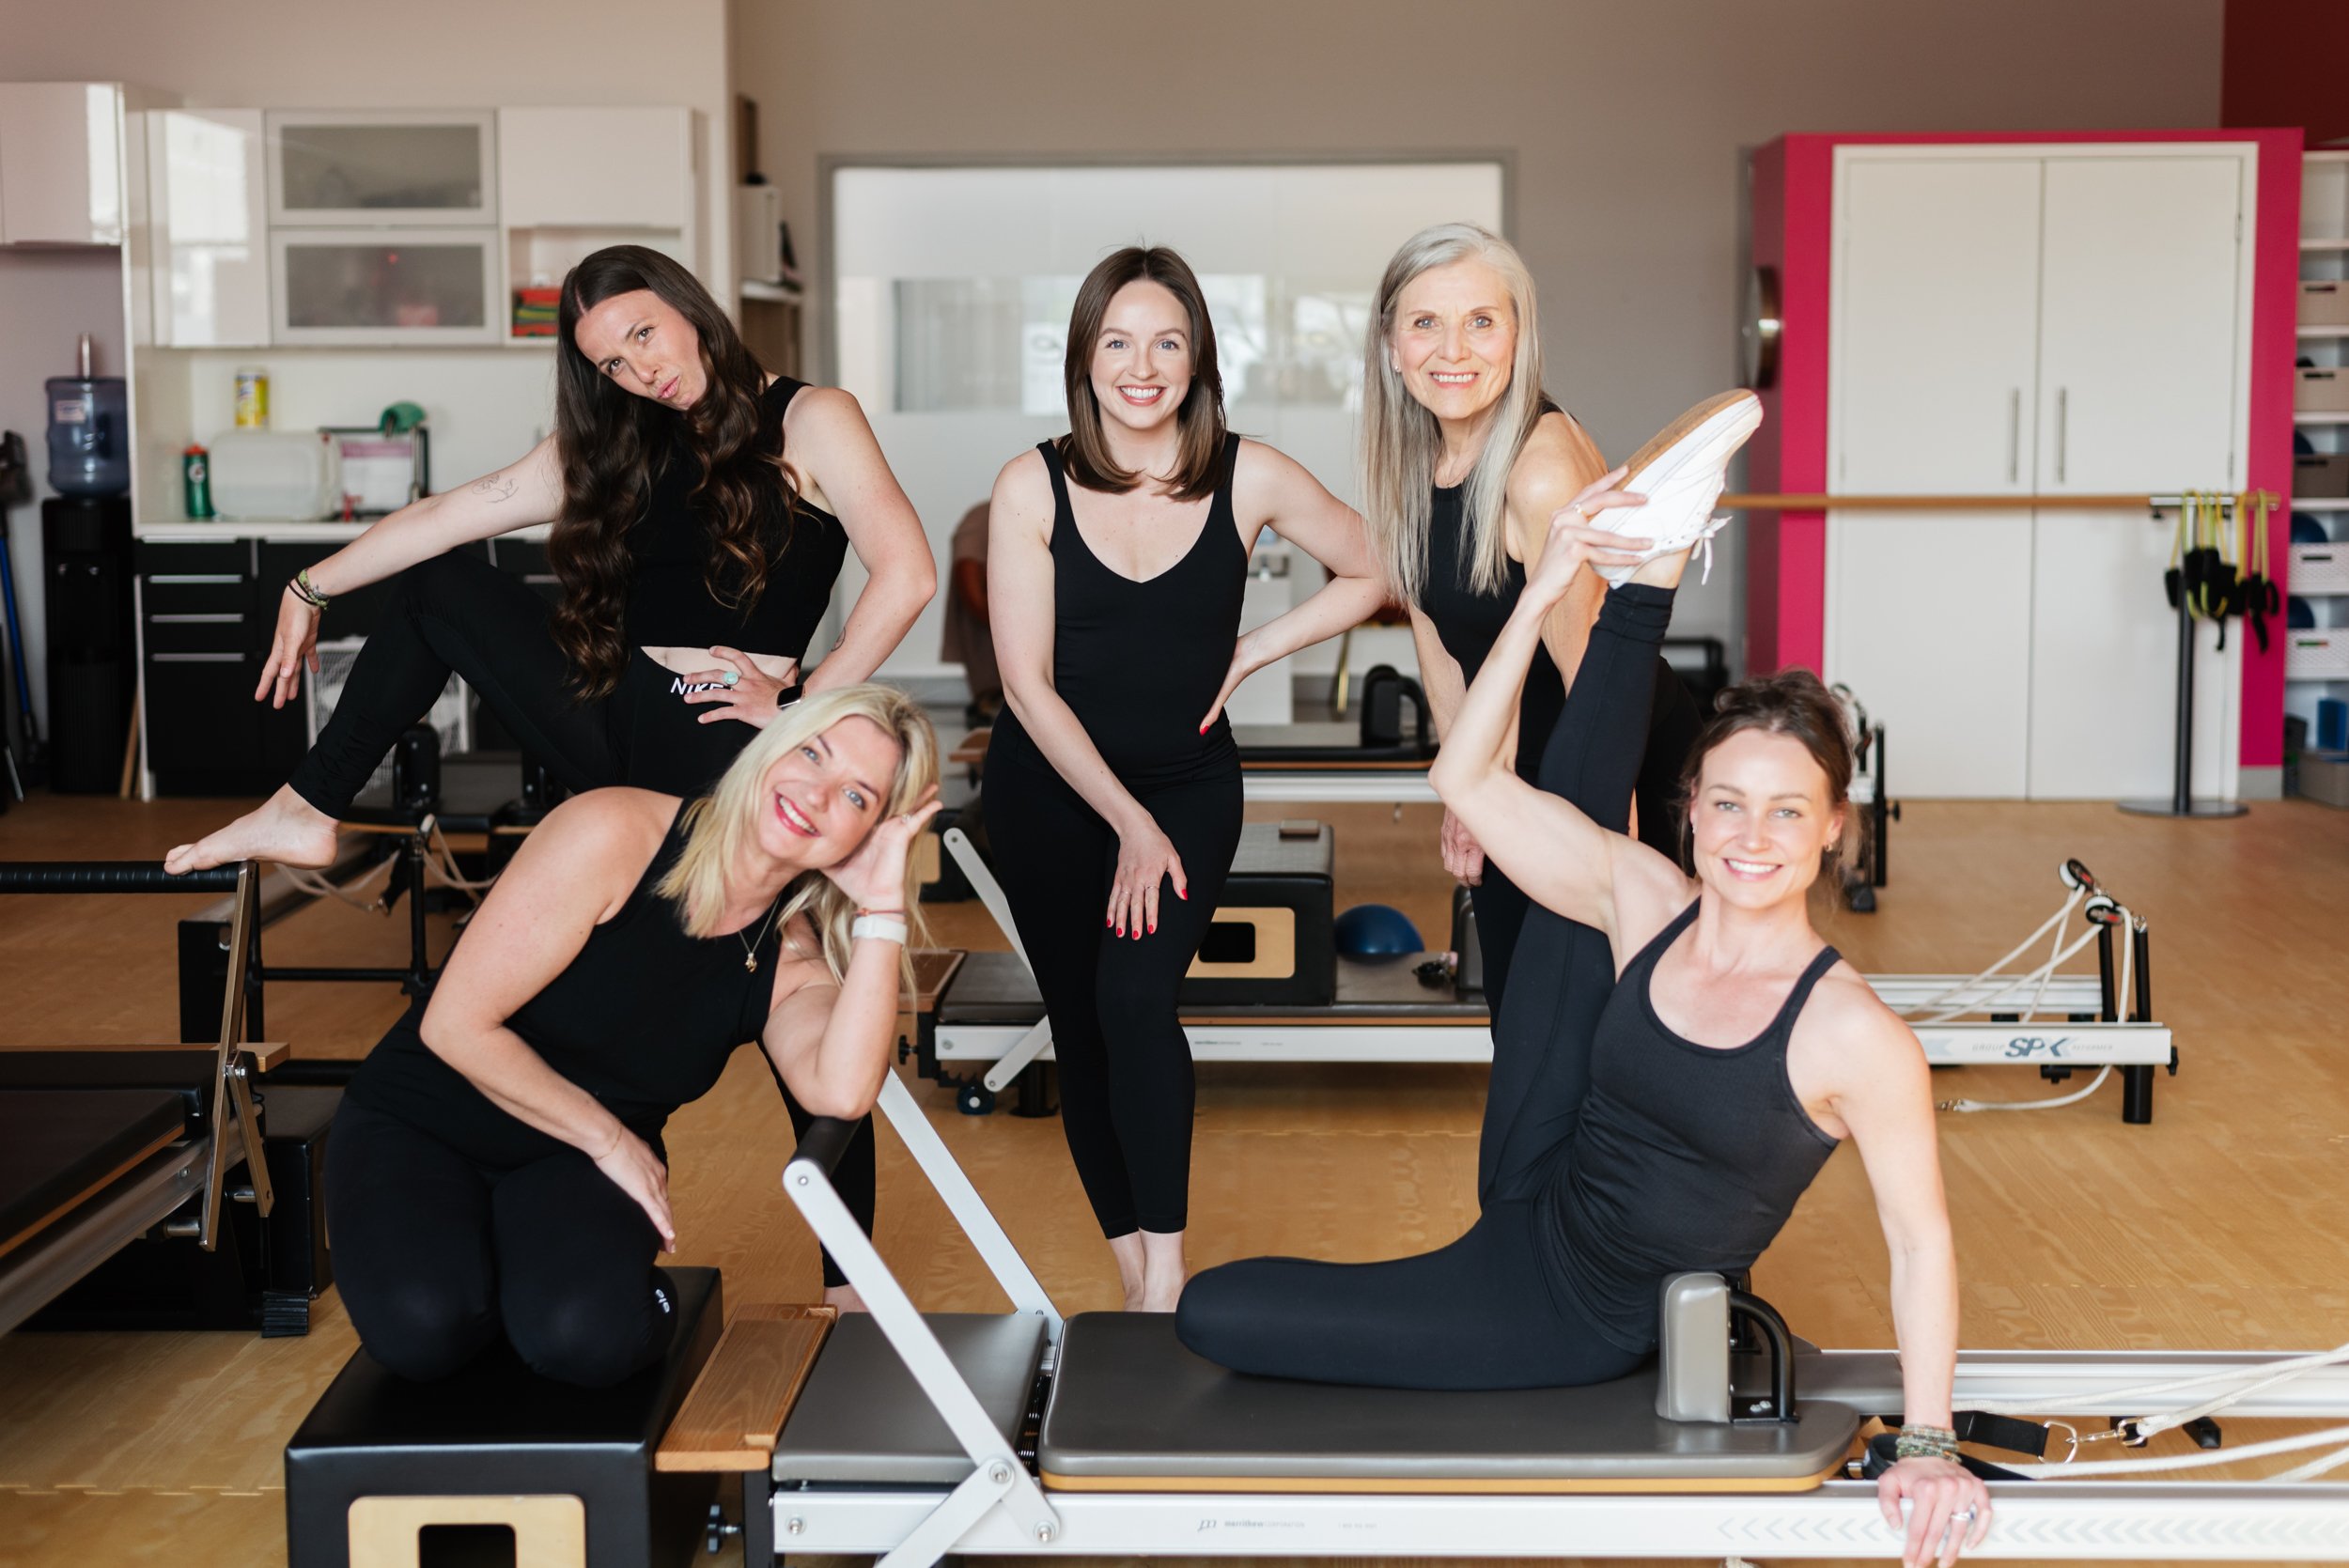  Group image of fitness instructors for commercial use. 